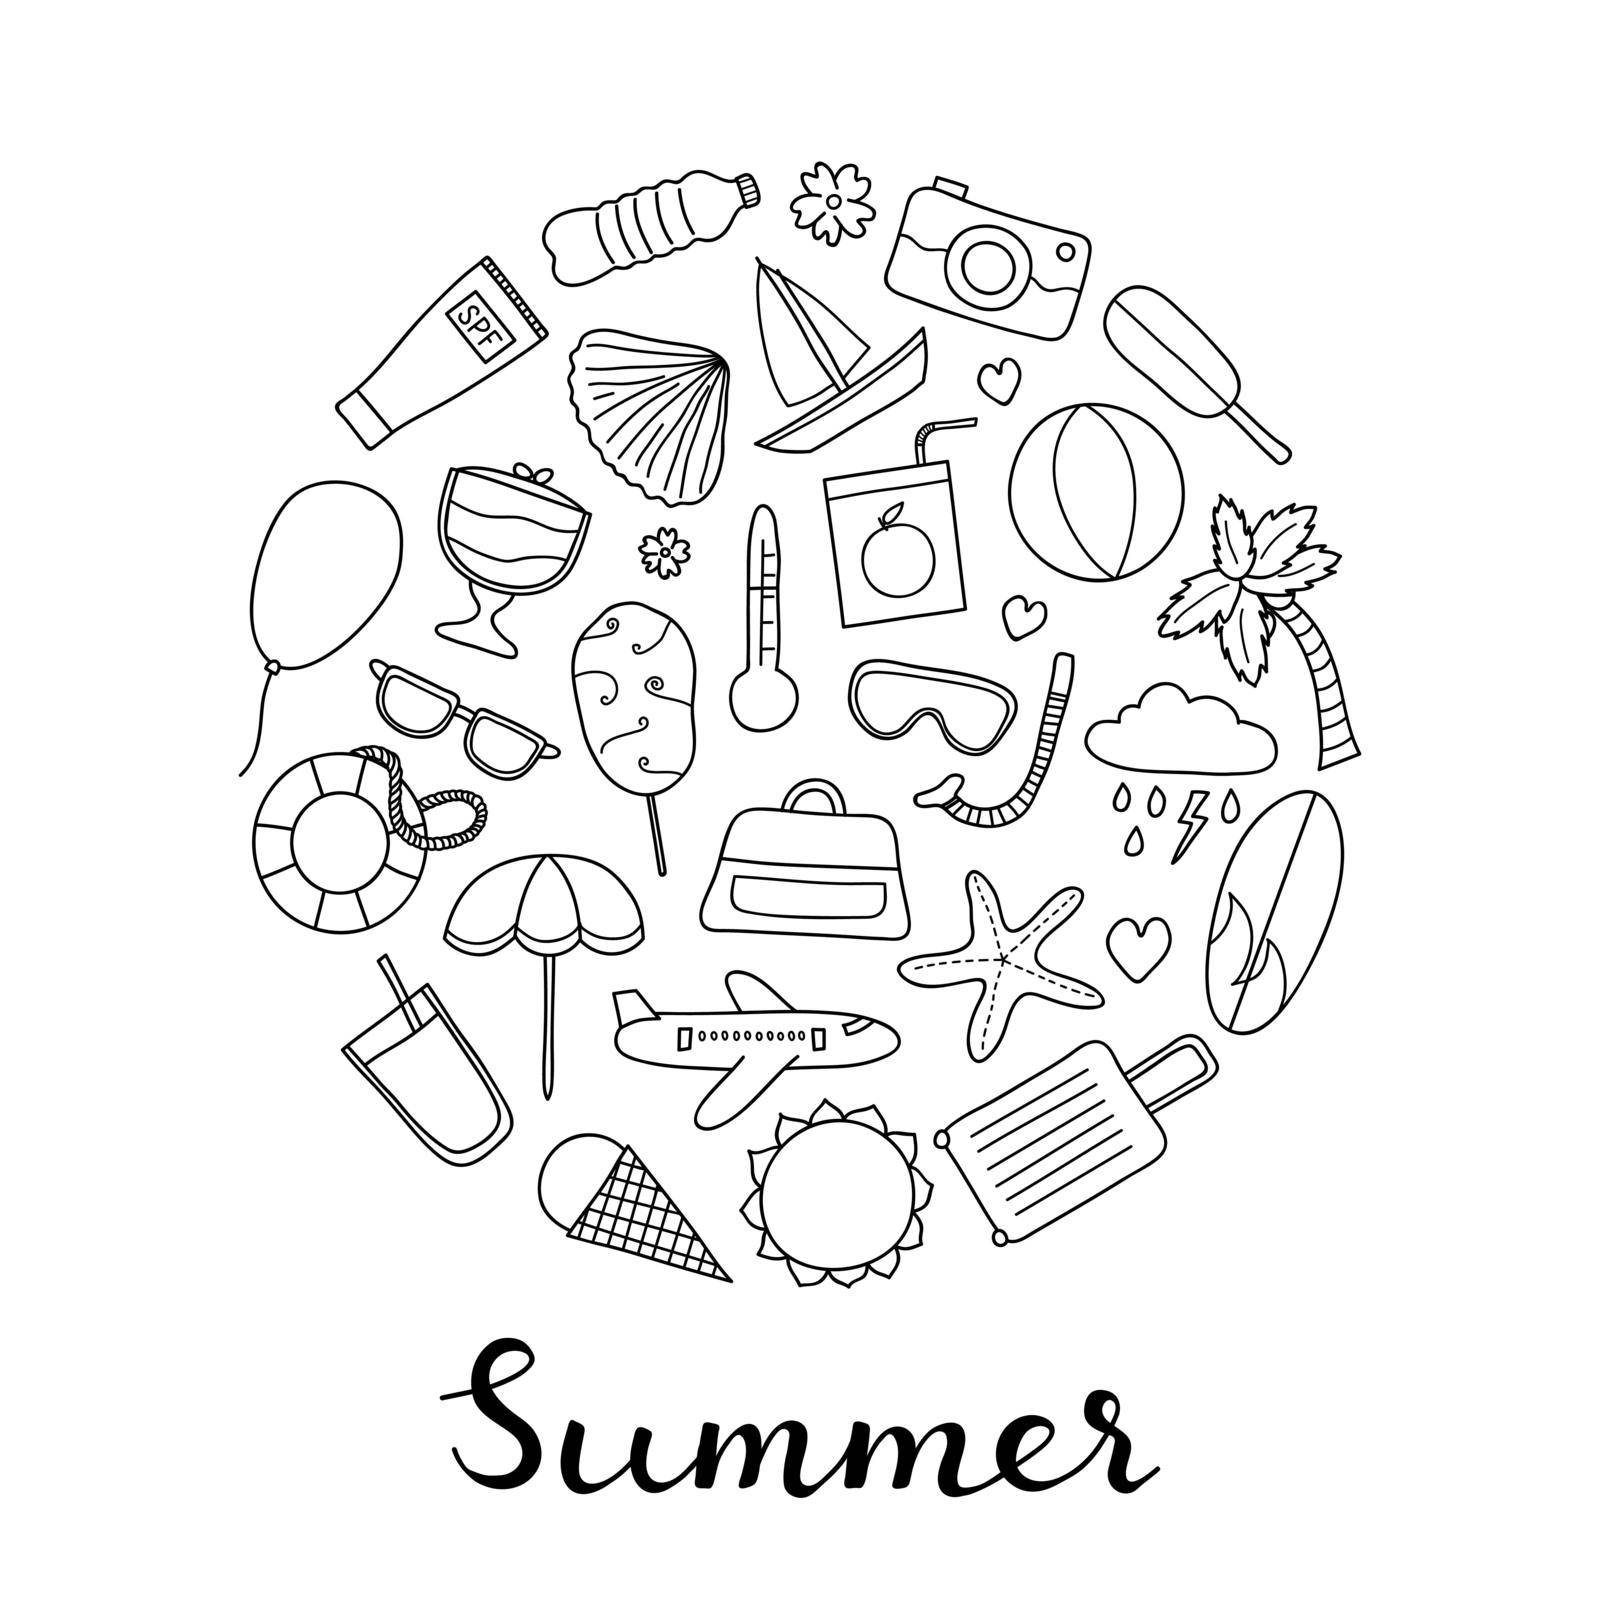 Doodle outline summer and vacation items composed in circle shape with lettering.